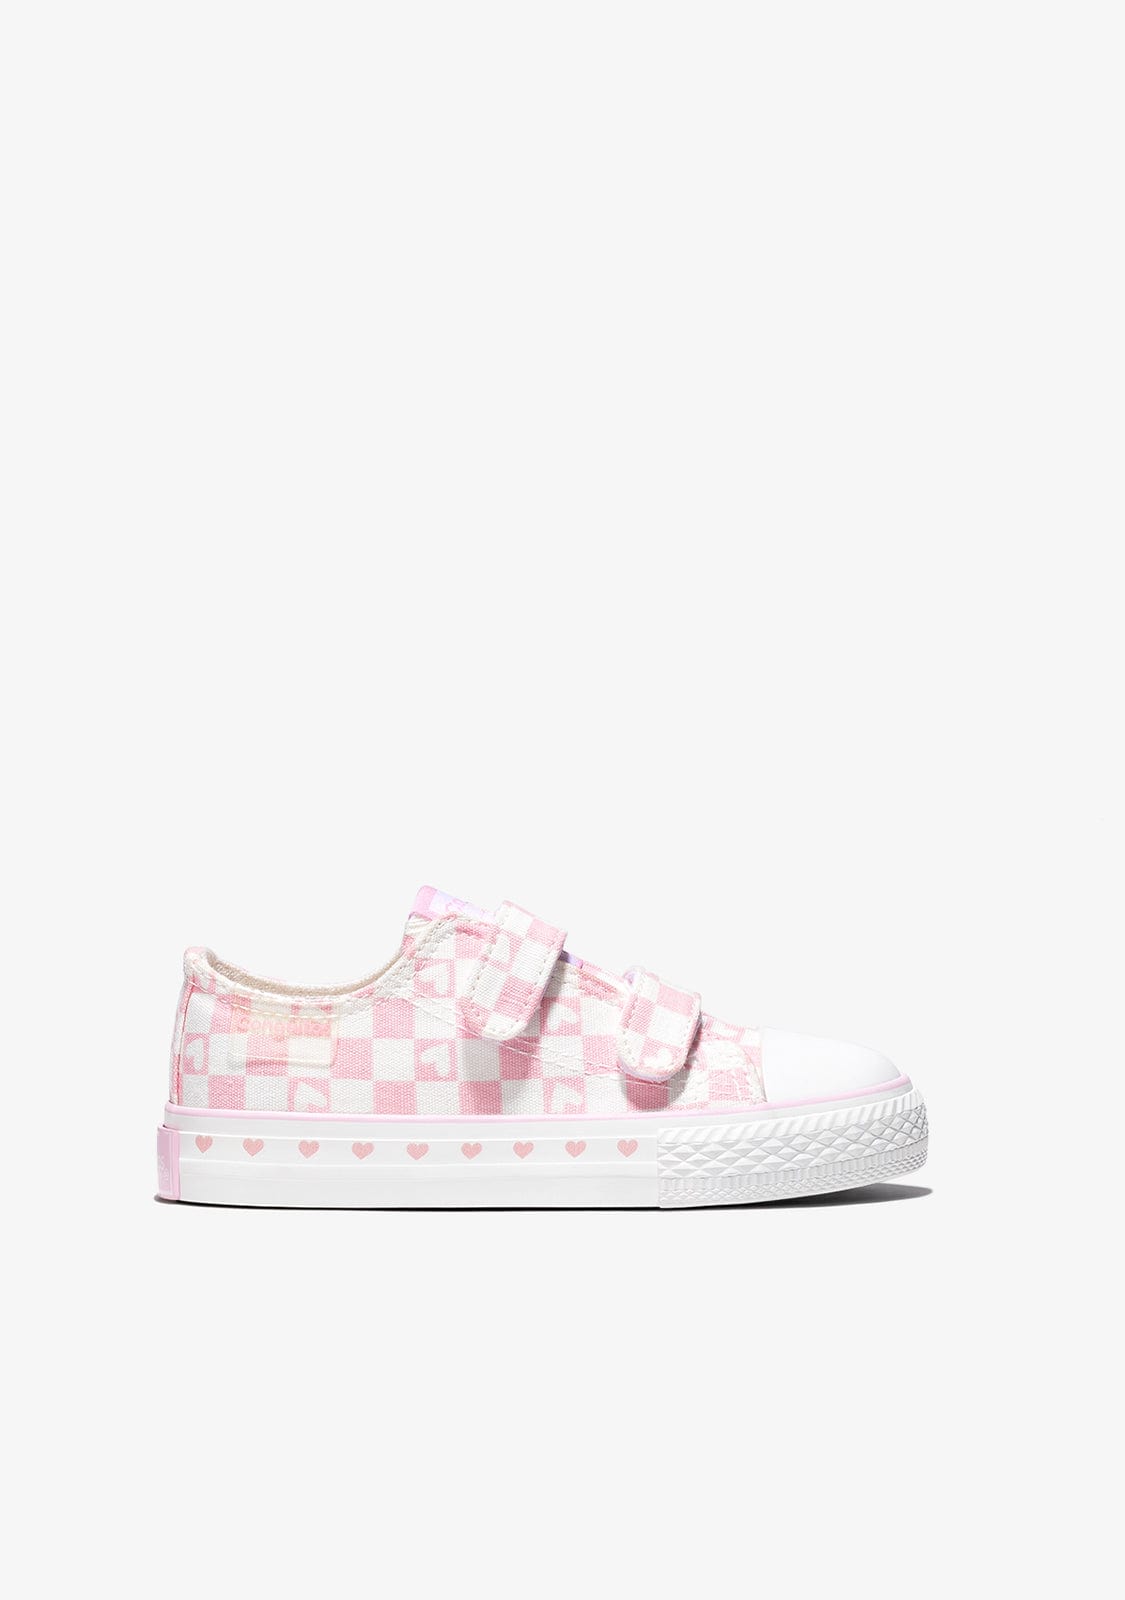 CONGUITOS Shoes Girl's Pink Squares Sneakers Canvas